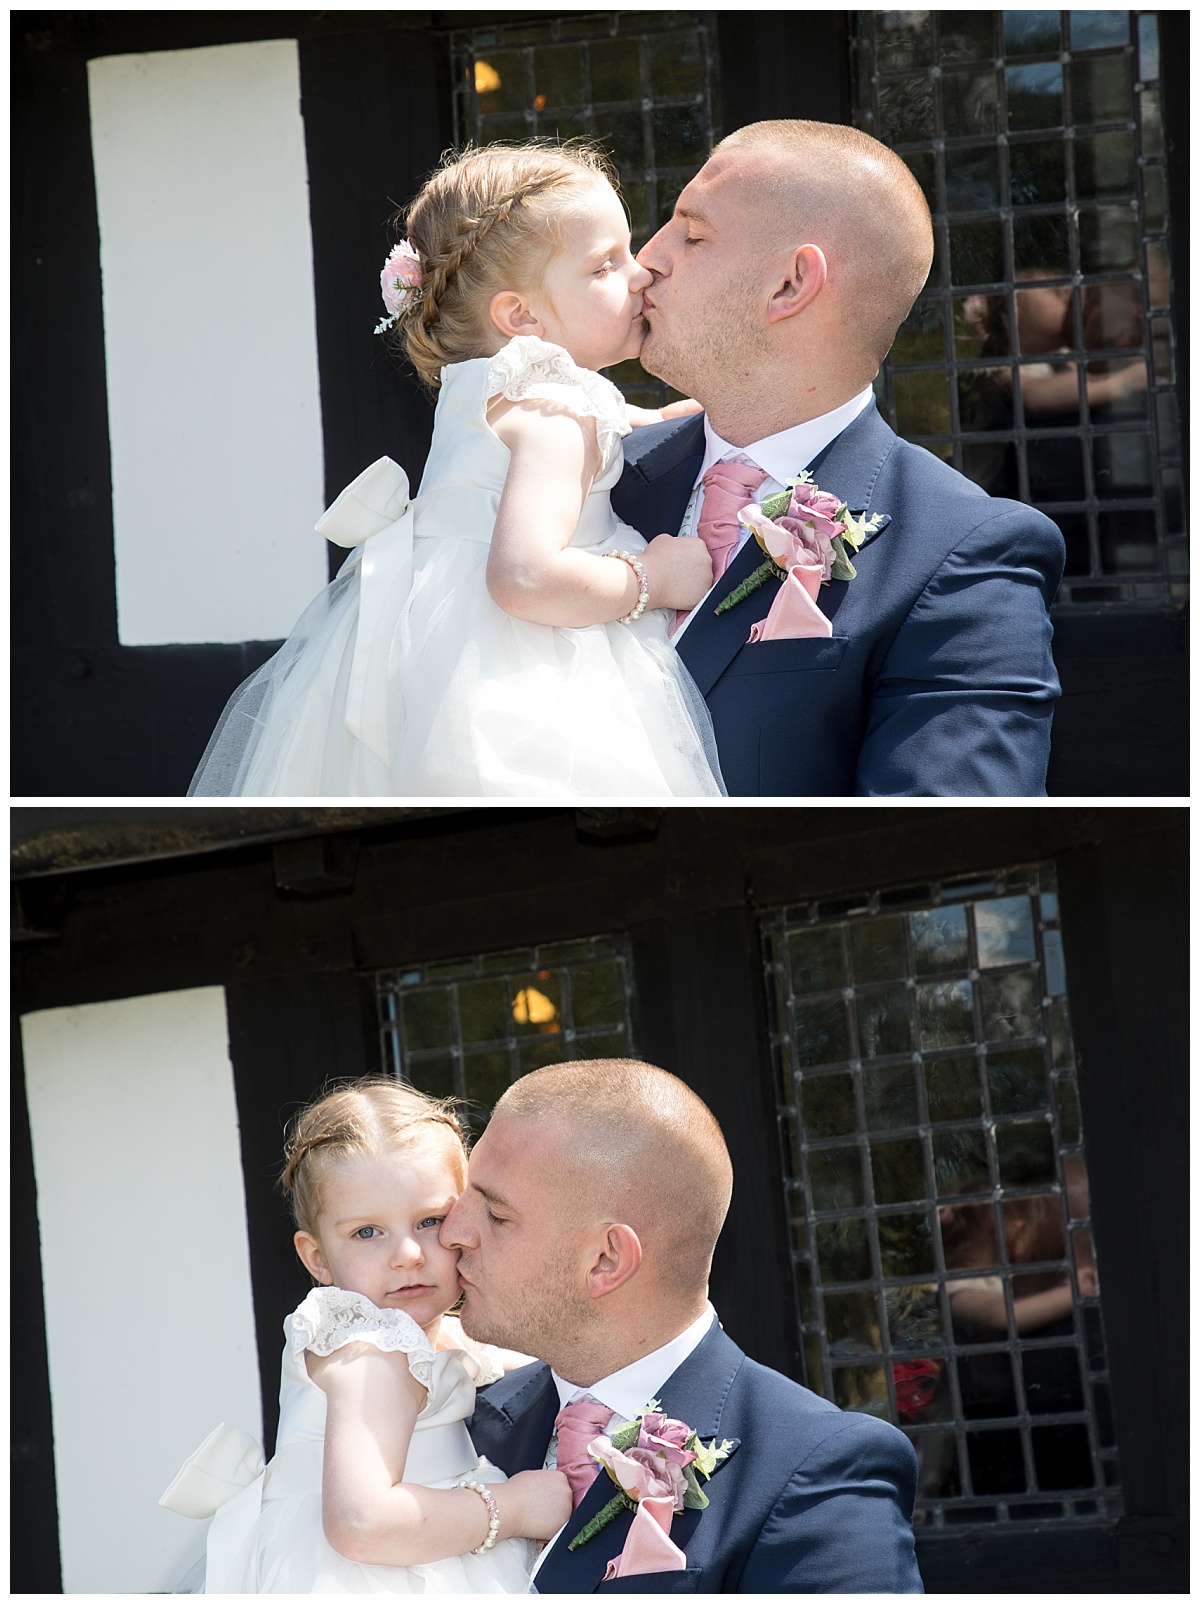 Wedding Photography Manchester - Melissa and Stuarts Mere Golf Resort And Spa Wedding Day 22